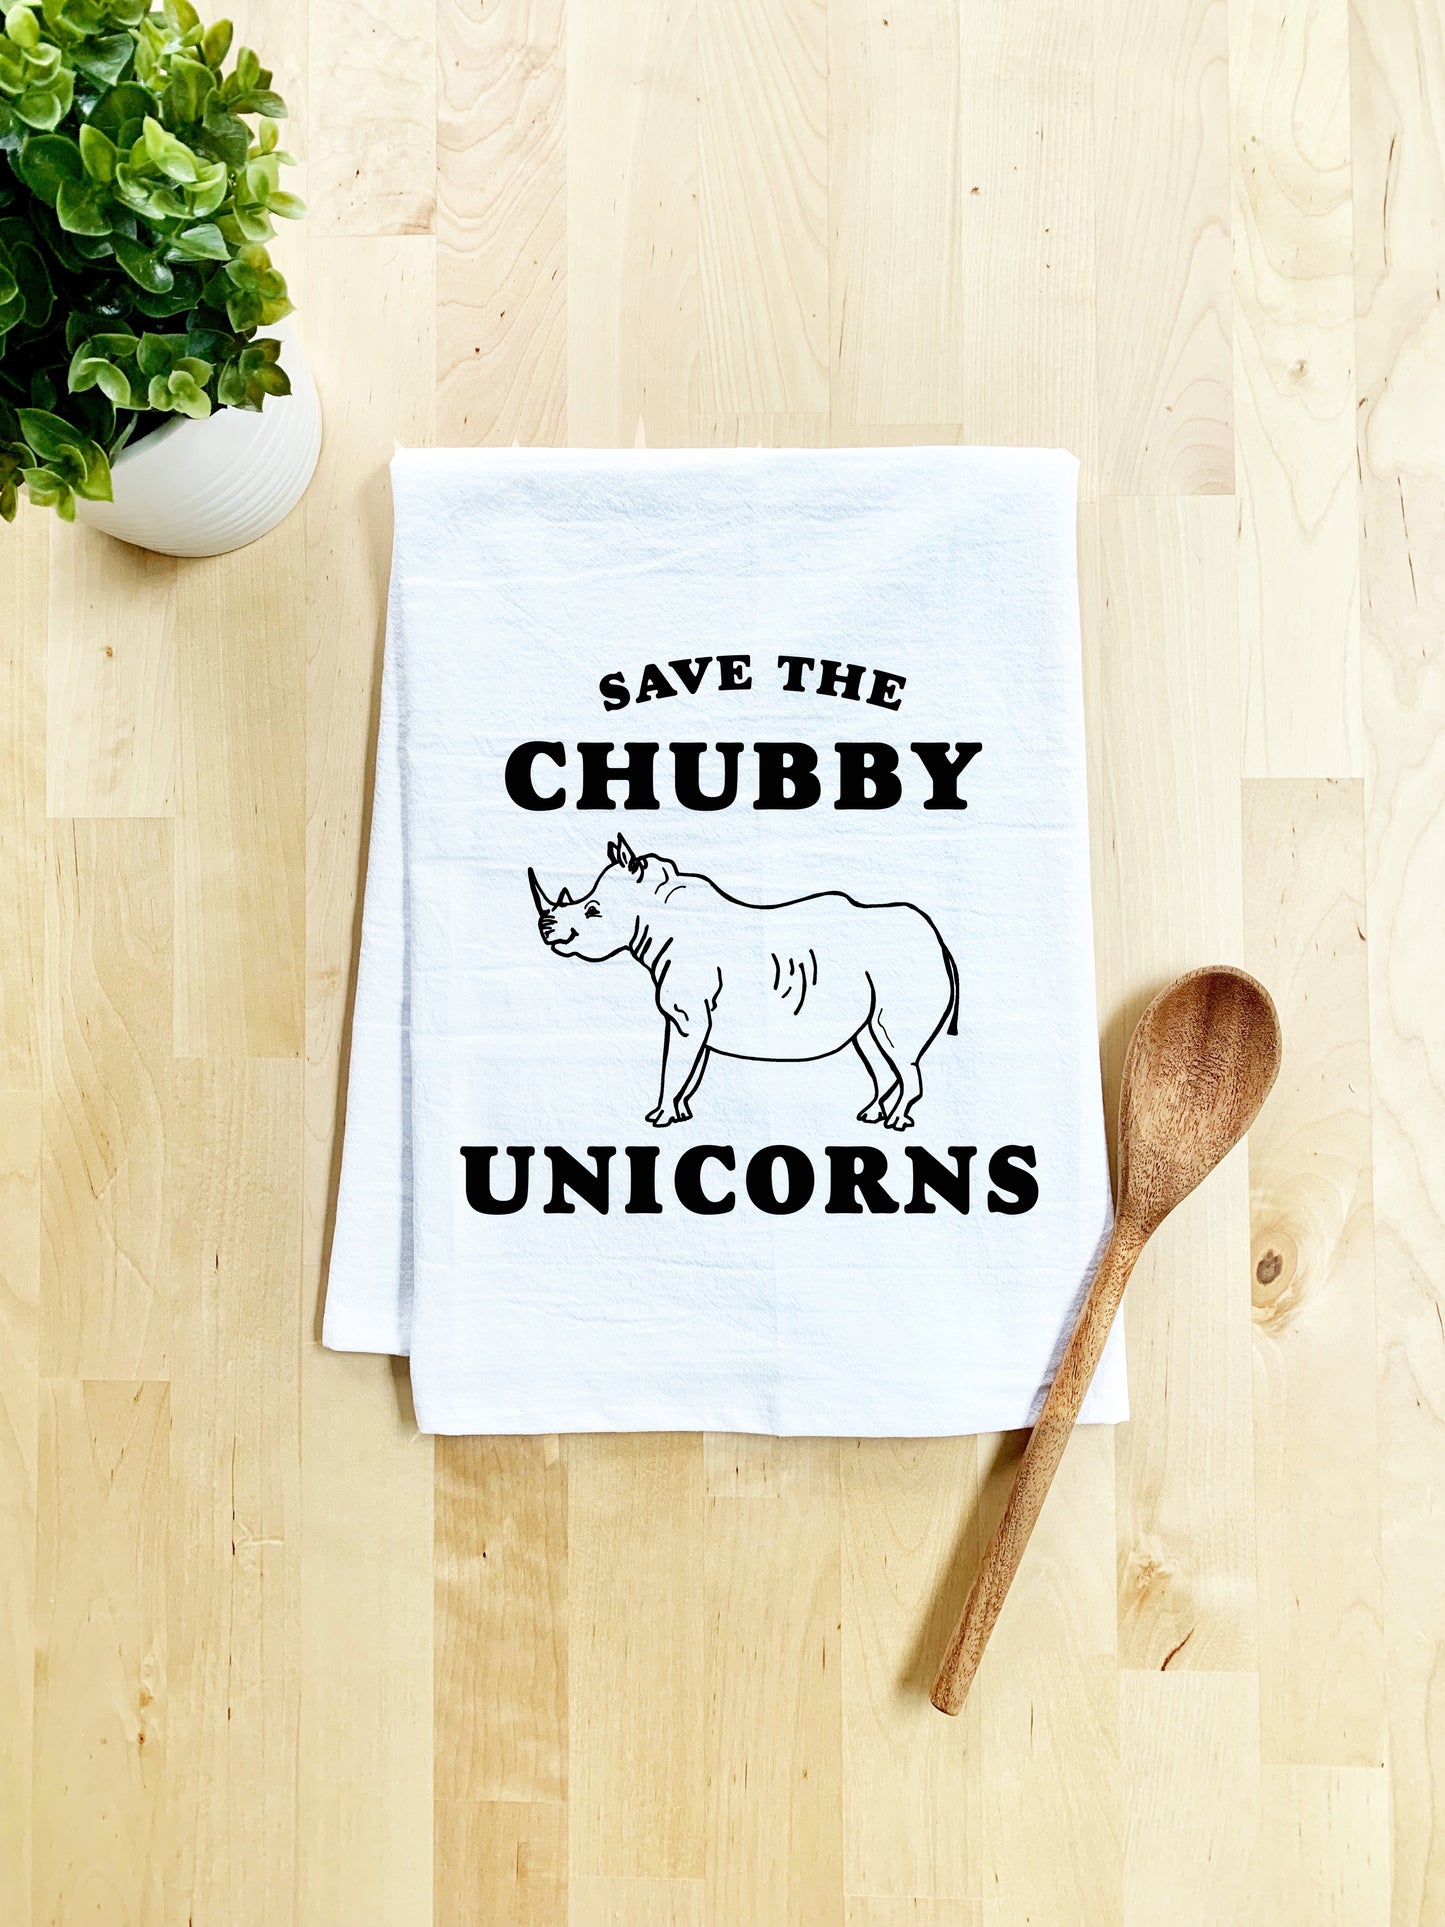 Save The Chubby Unicorns Dish Towel - White Or Gray - MoonlightMakers